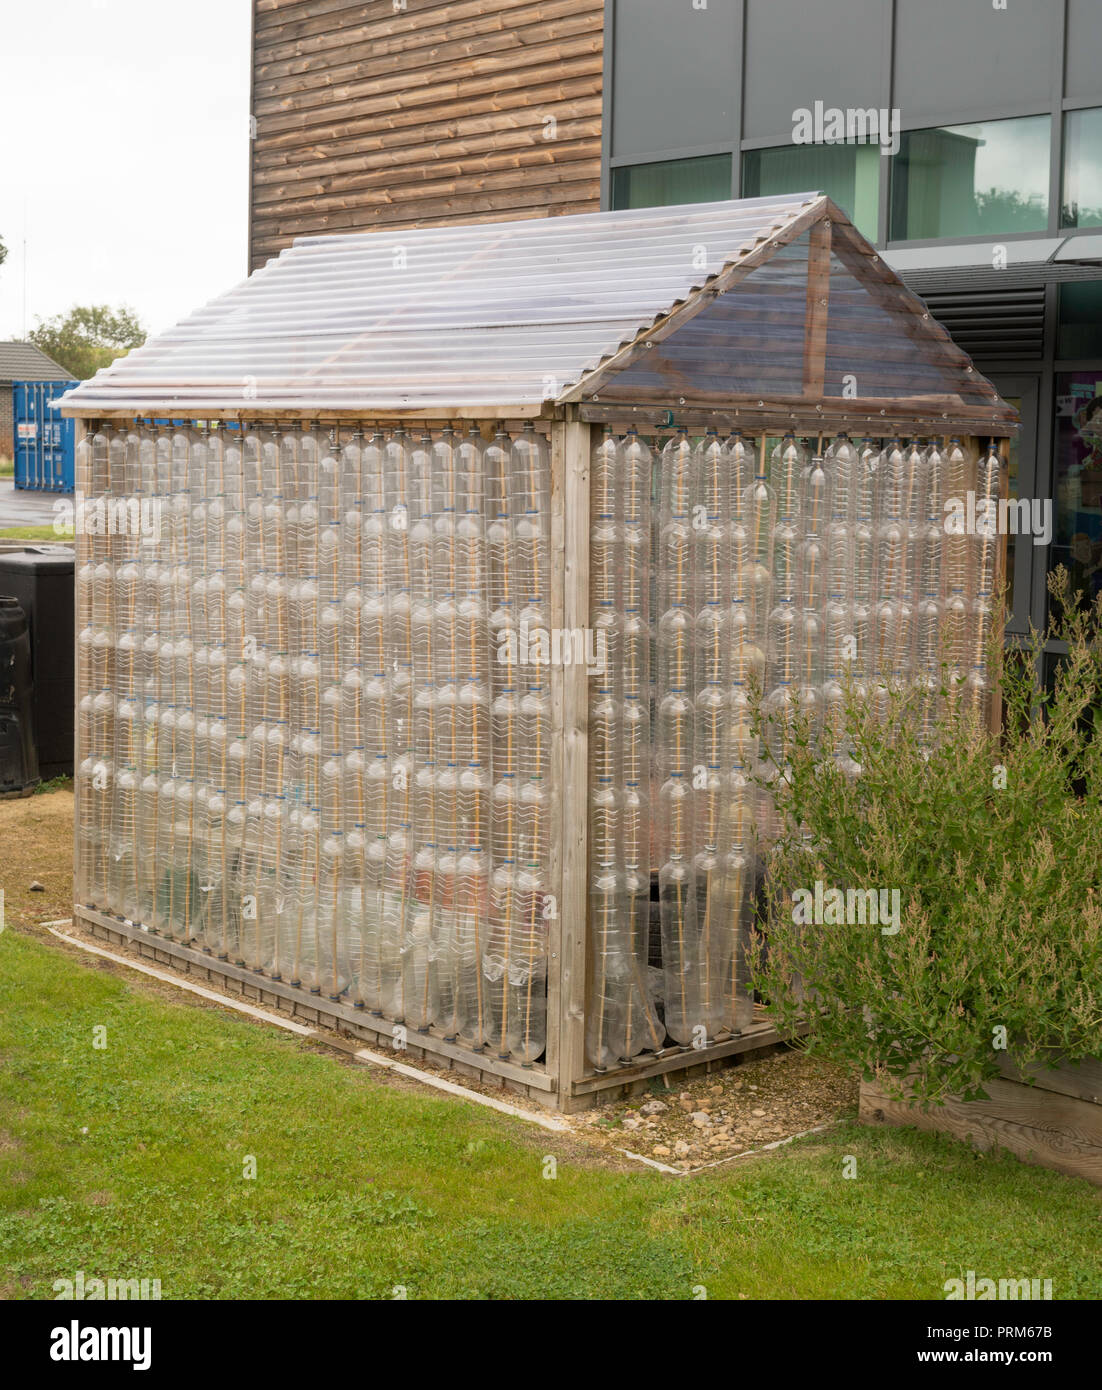 Greenhouse made from recycled plastic bottles at the Campground waste and recycling centre in Wrekenton, Gateshead, England, UK Stock Photo